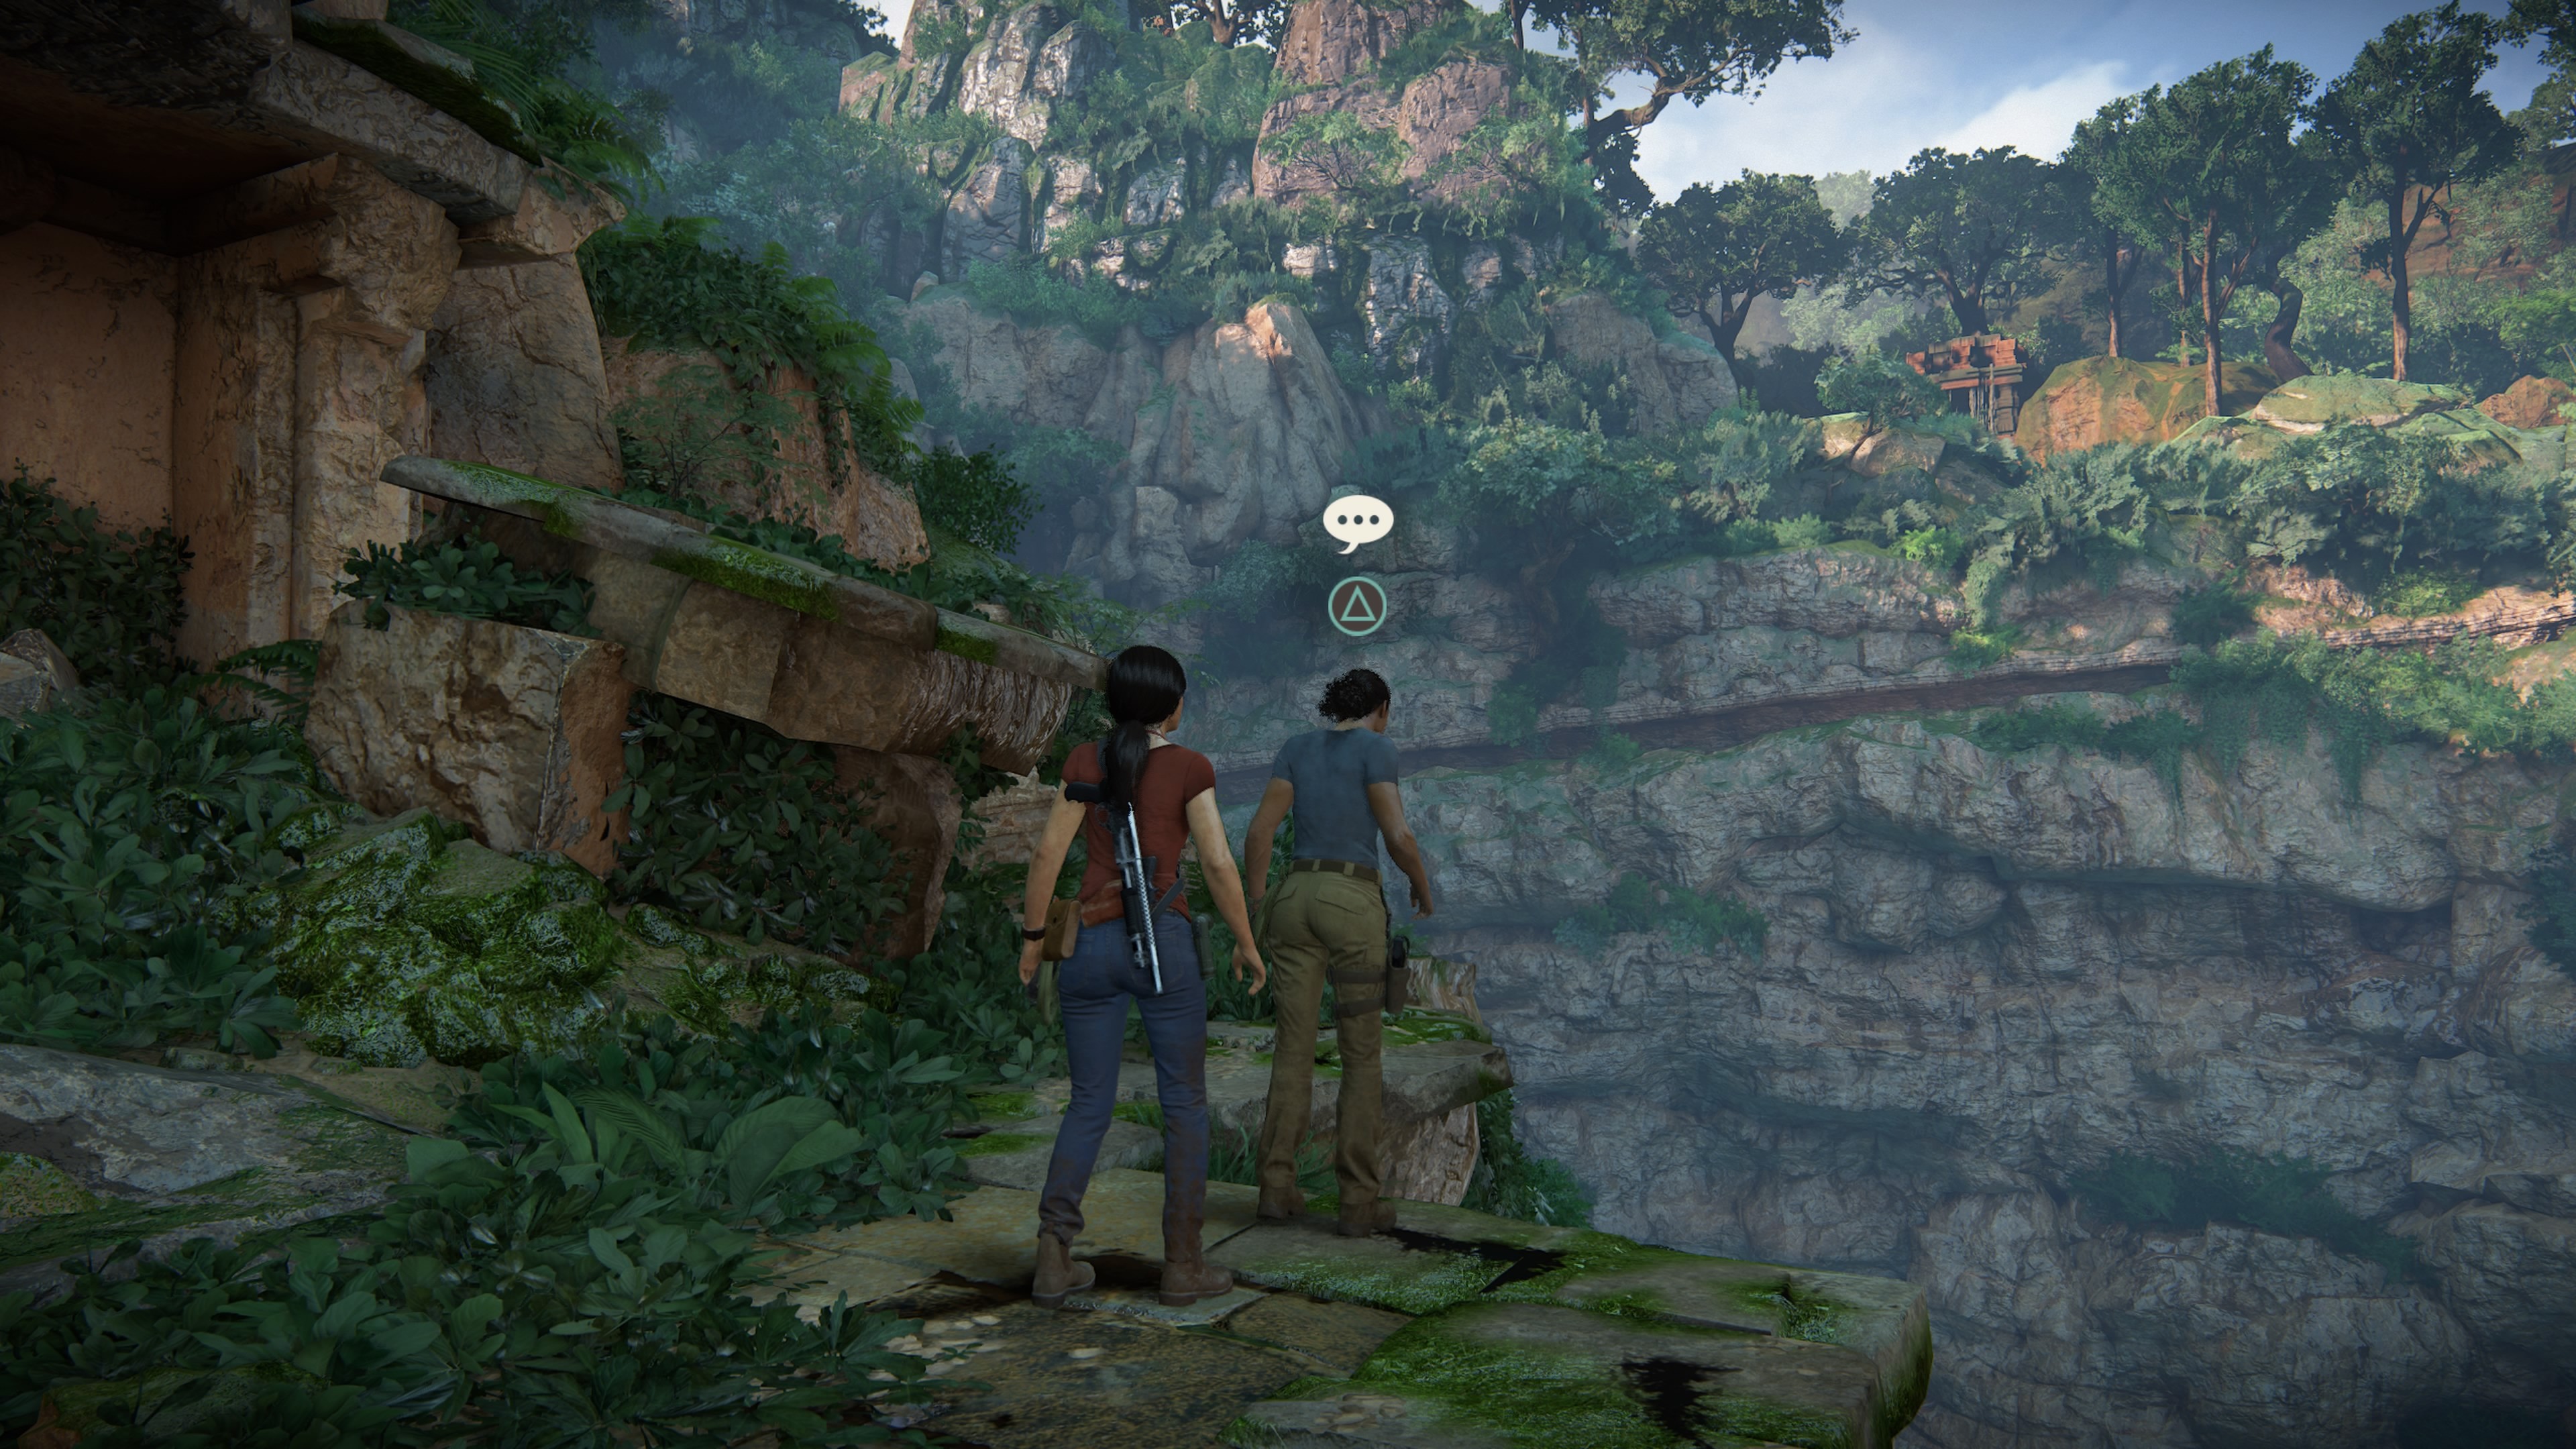 Uncharted 2: Among Thieves - Extended Collection DLC Trophy Guide & Roadmap  - Extended Collection Trophies (Uncharted 2) 